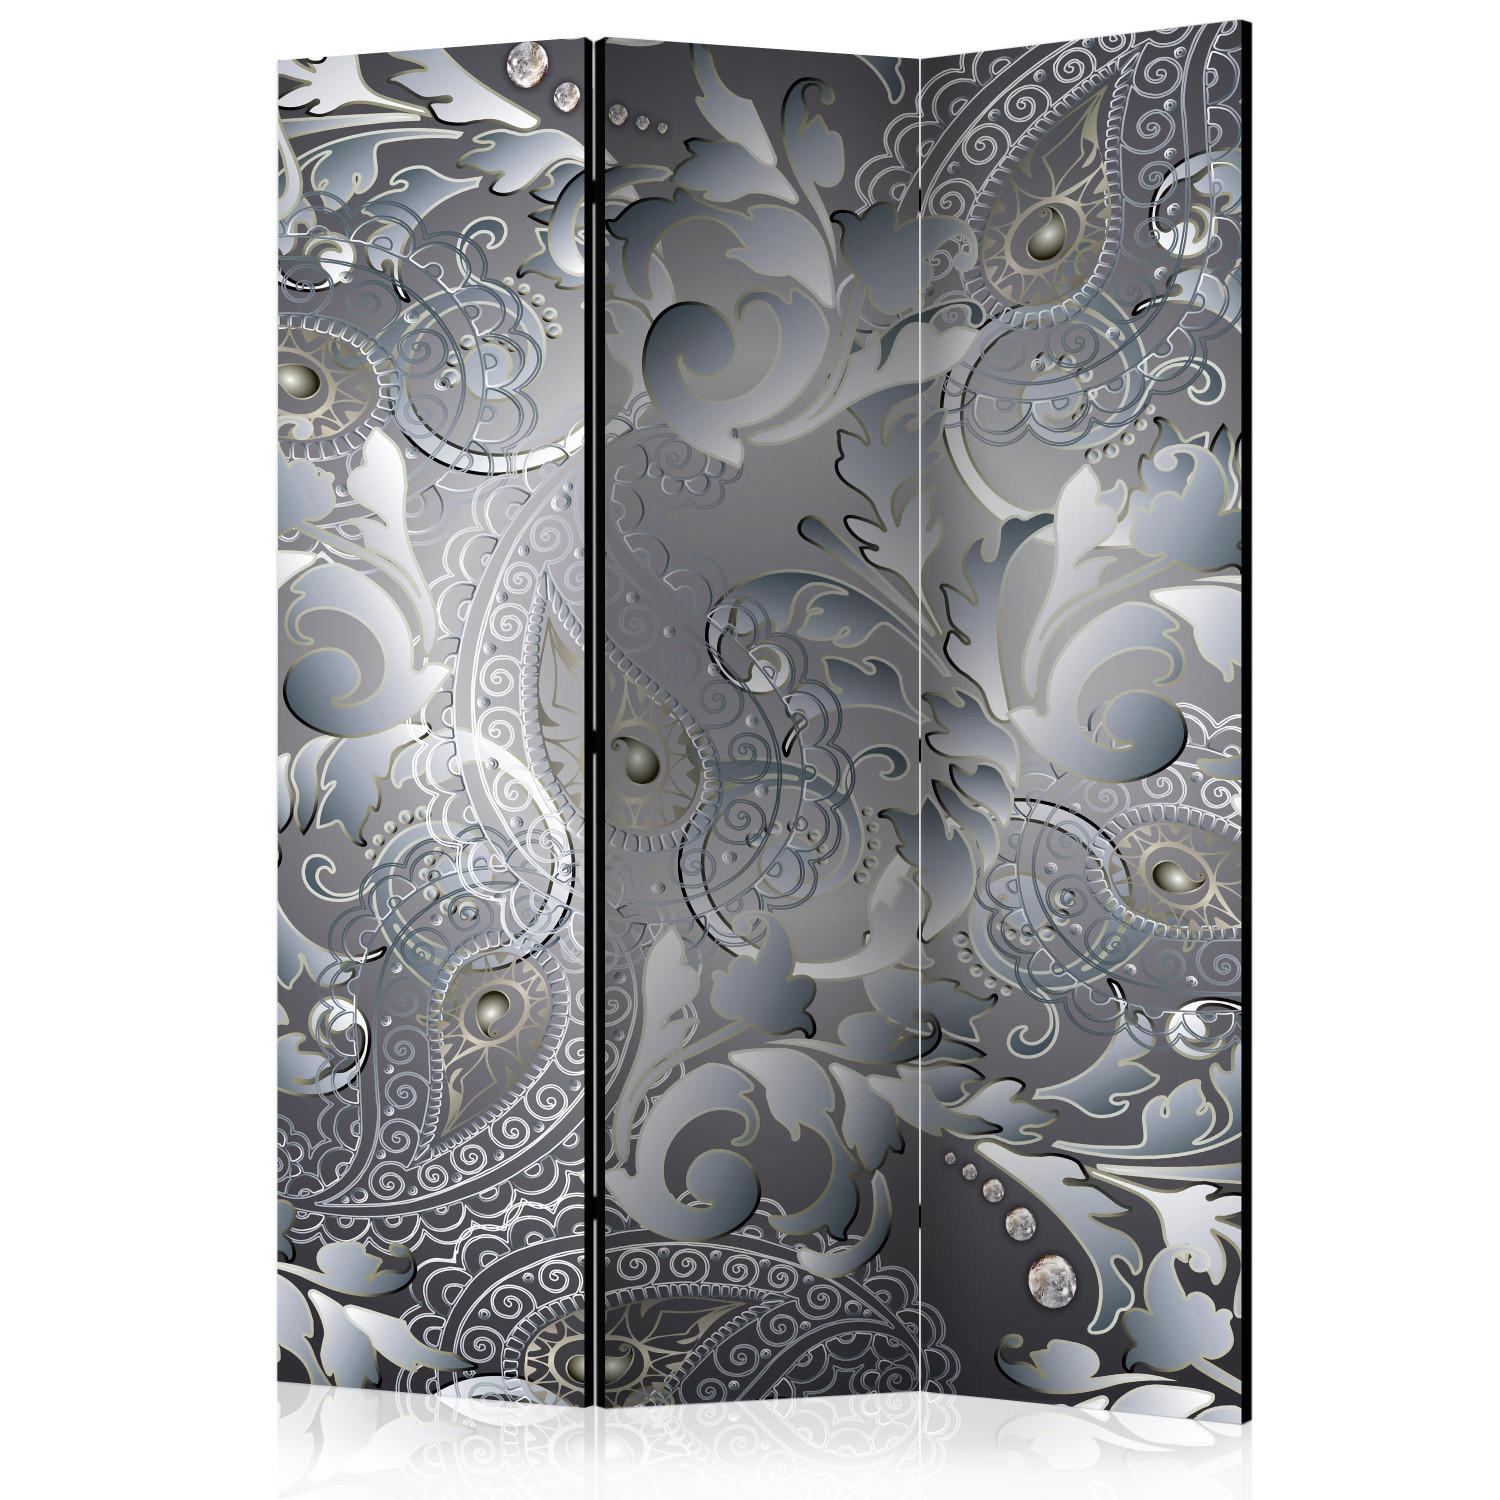 Room Divider Oriental Design (3-piece) - gray abstraction in floral ornaments